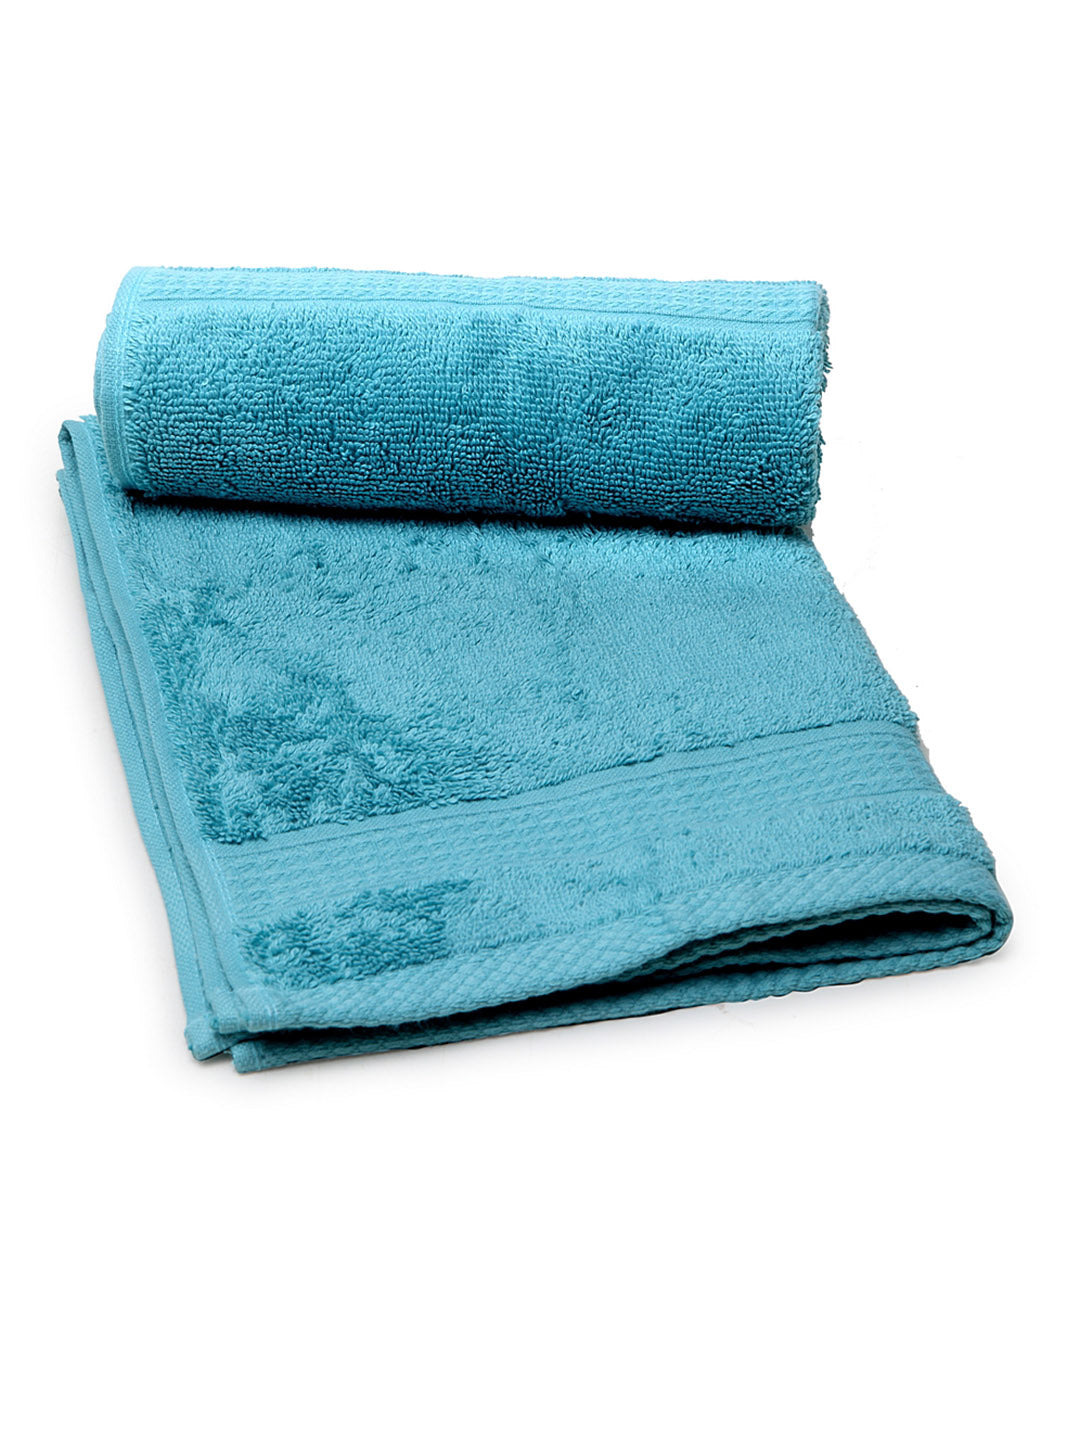 Spaces Organic 2 Pieces Hand Towels (Blue)